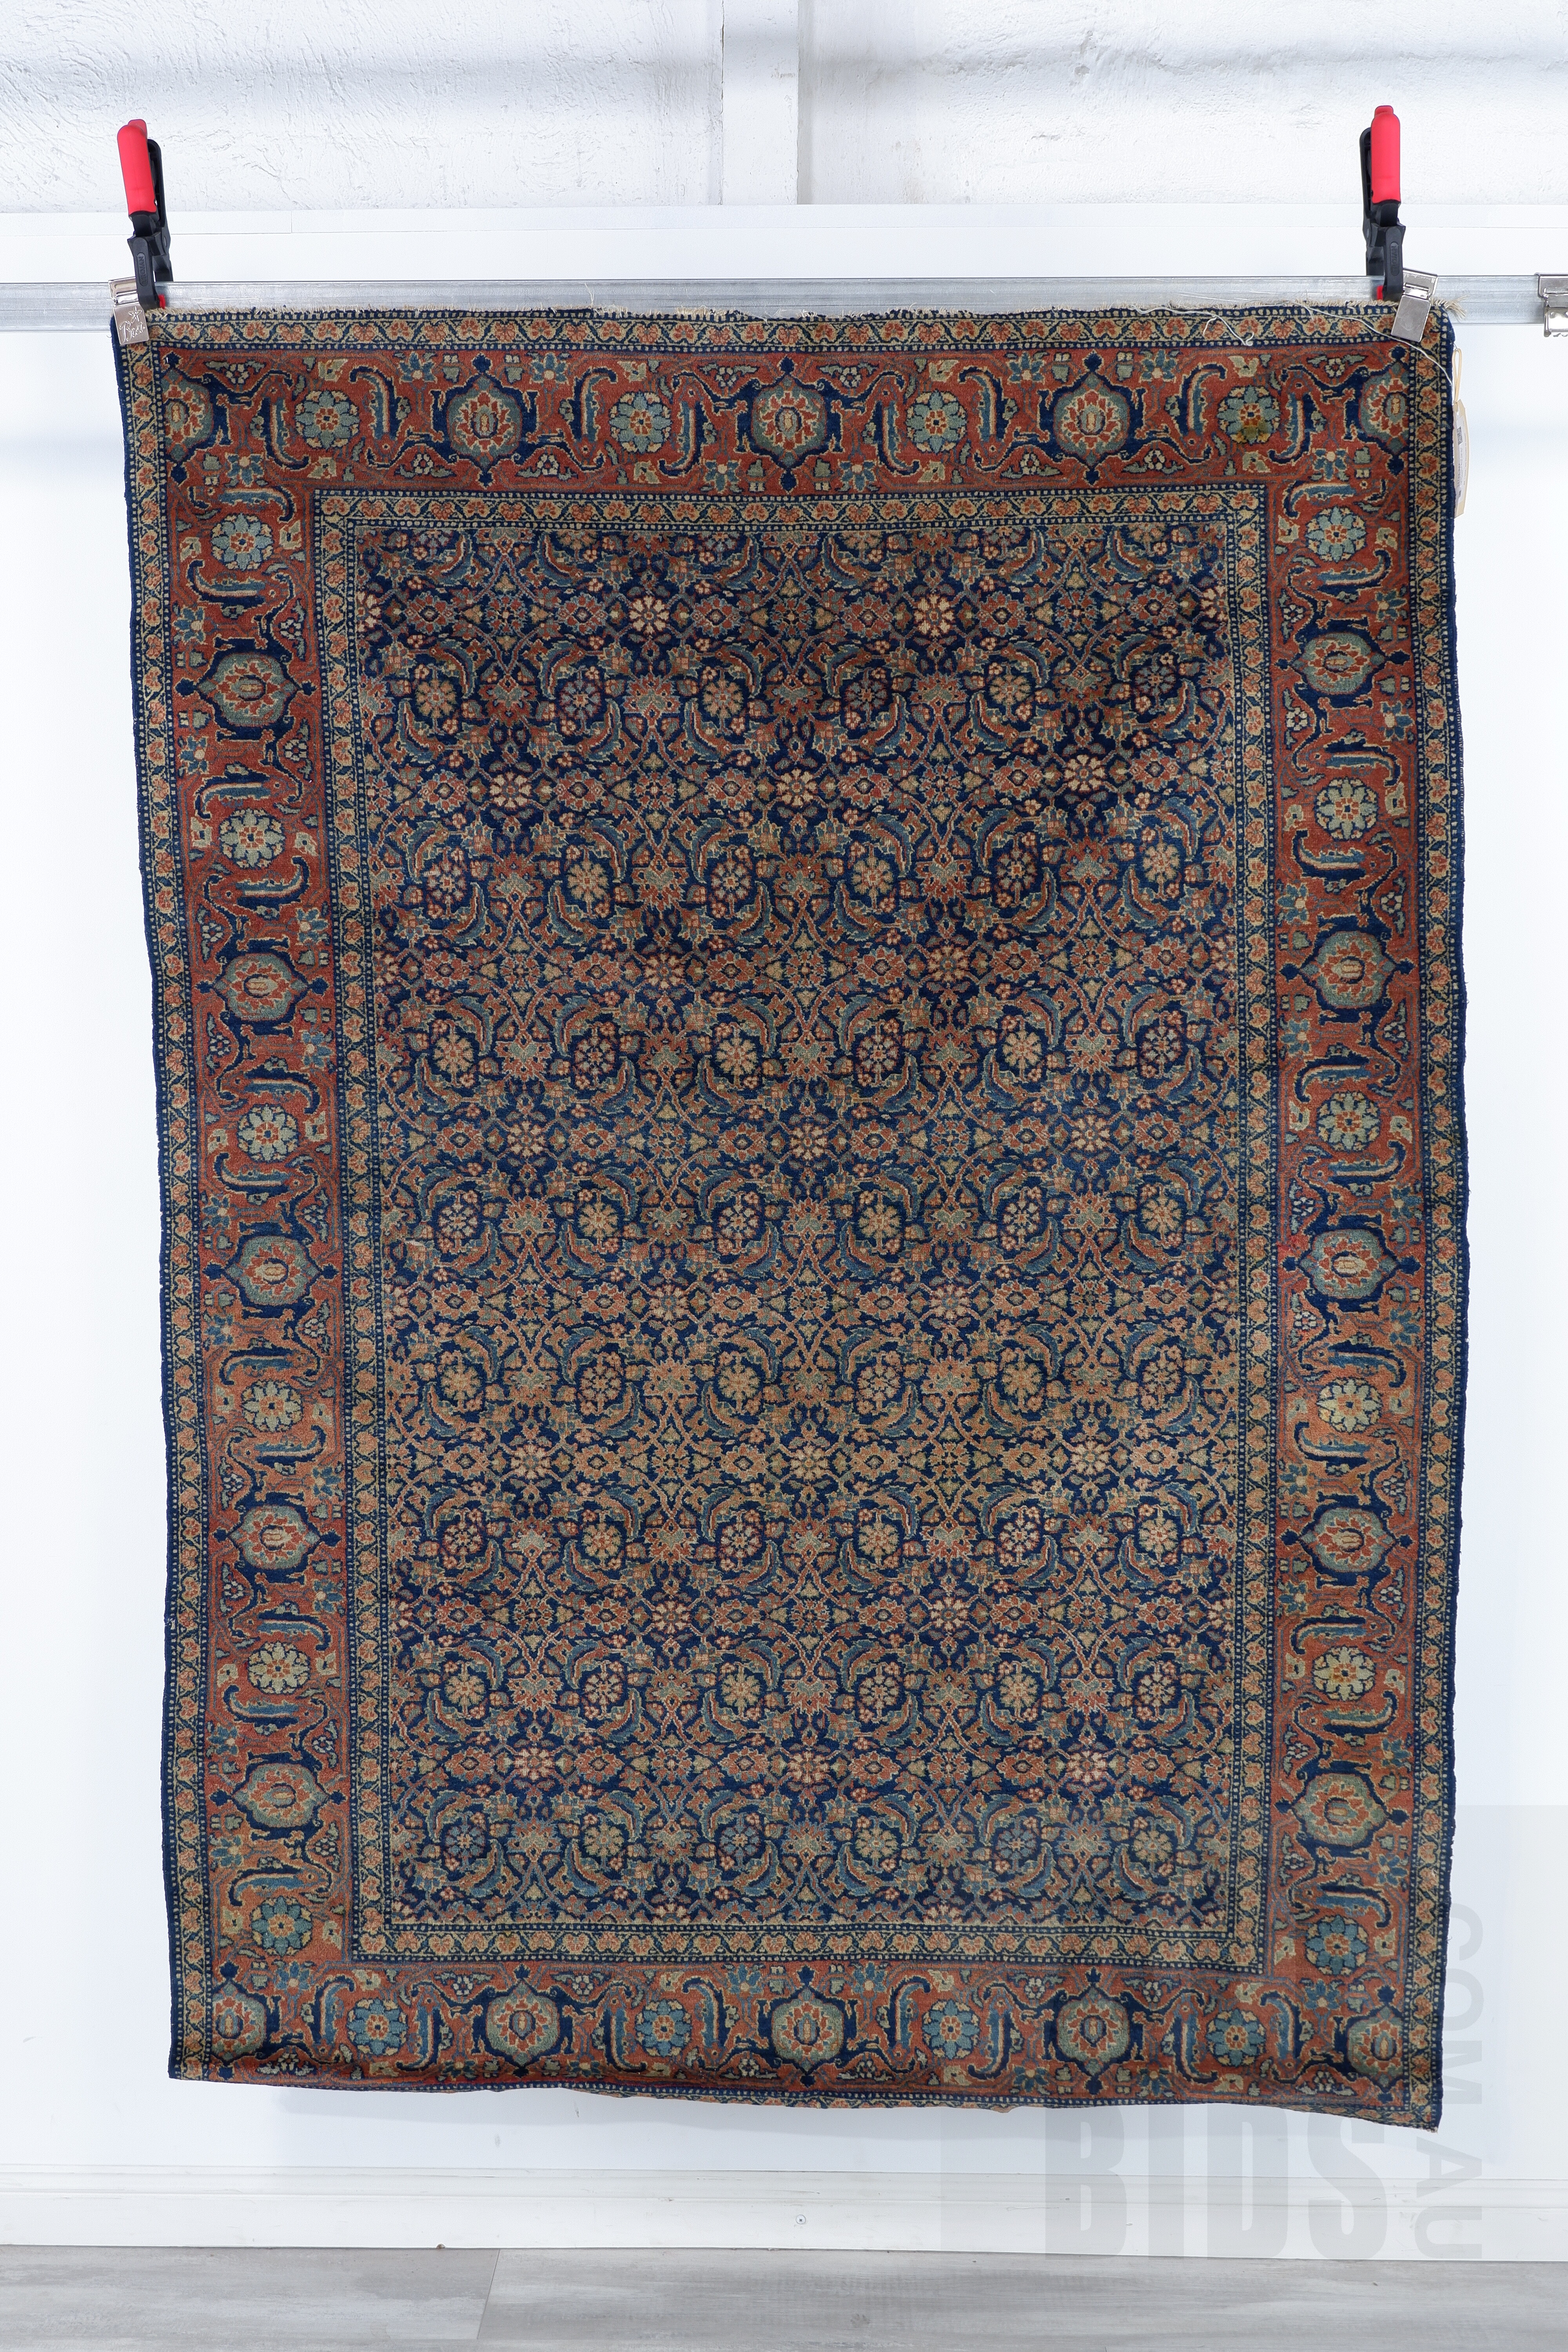 'Antique Fine Sarouk Hand Knotted Persian Rug with Herati Pattern'